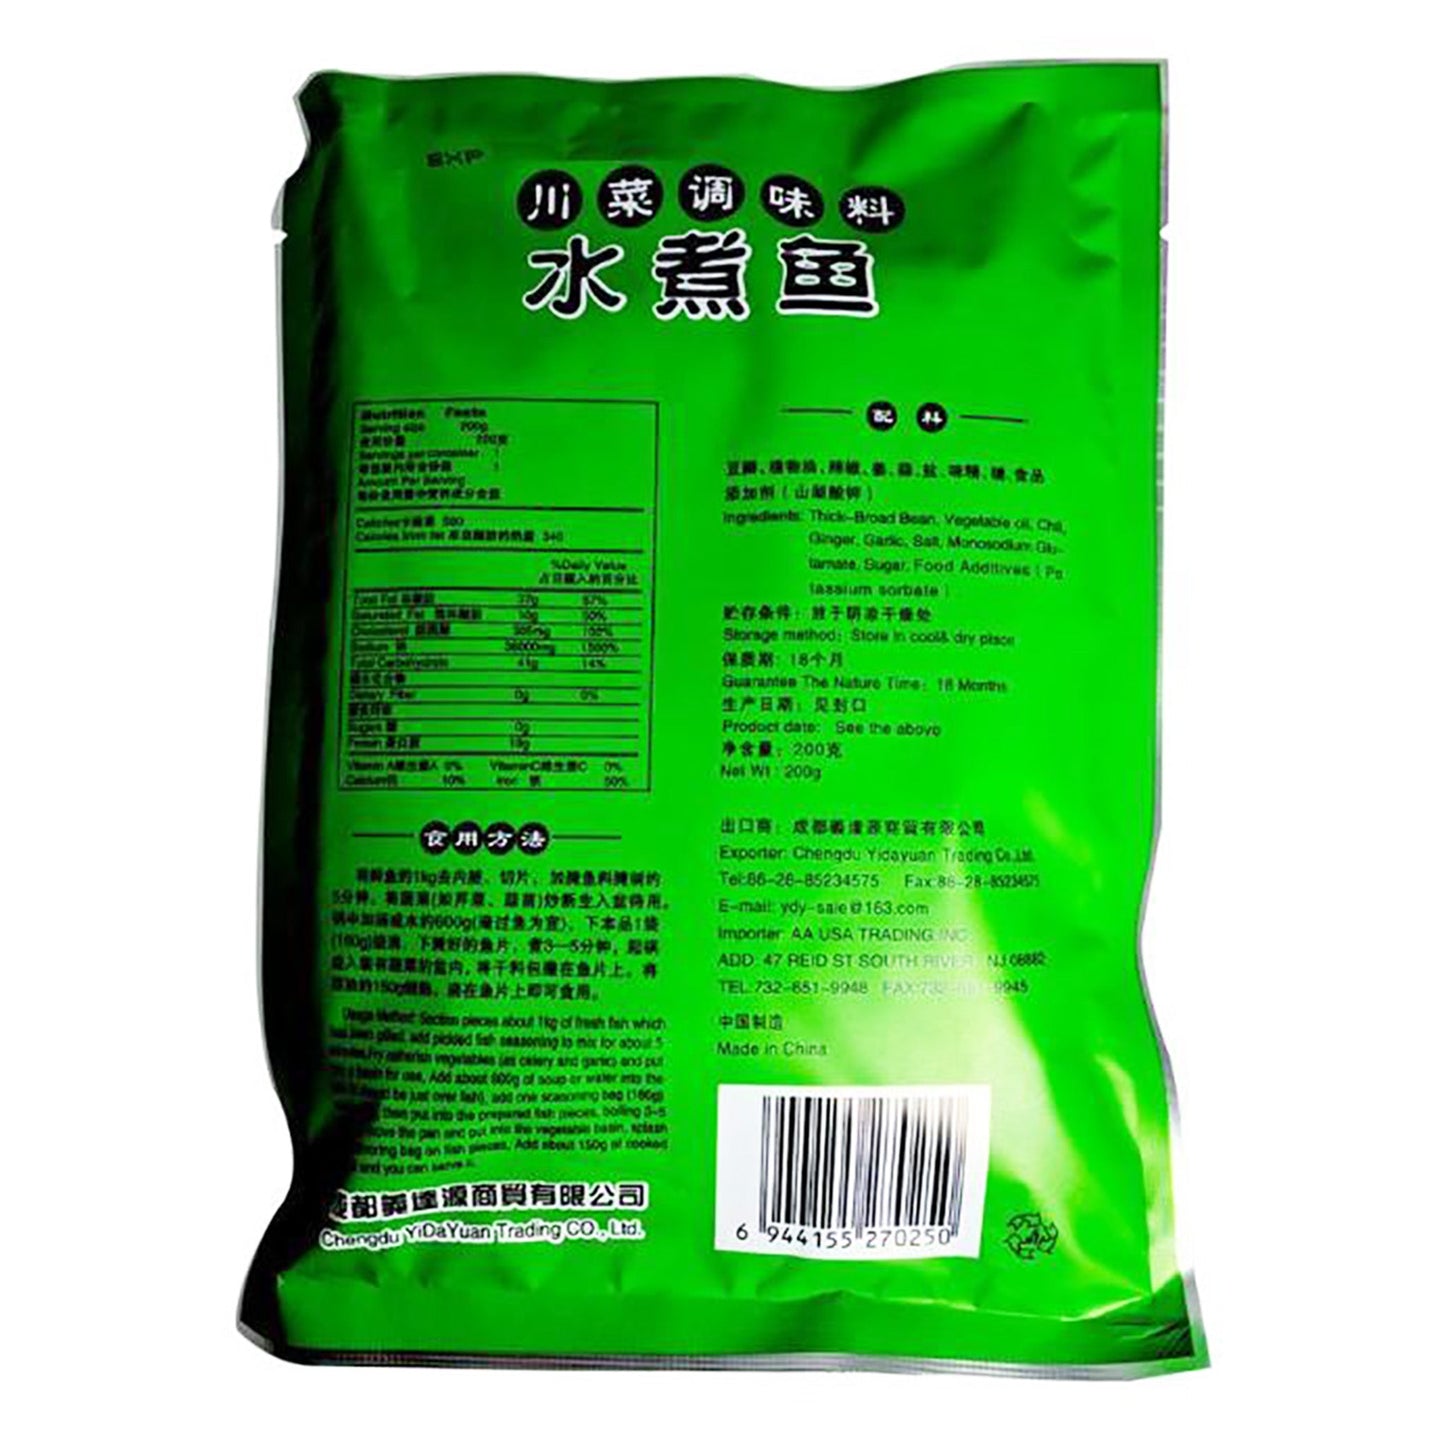 Back graphic image of AA Sichuan Fish Seasoning Mix Hot & Spicy 7.05oz